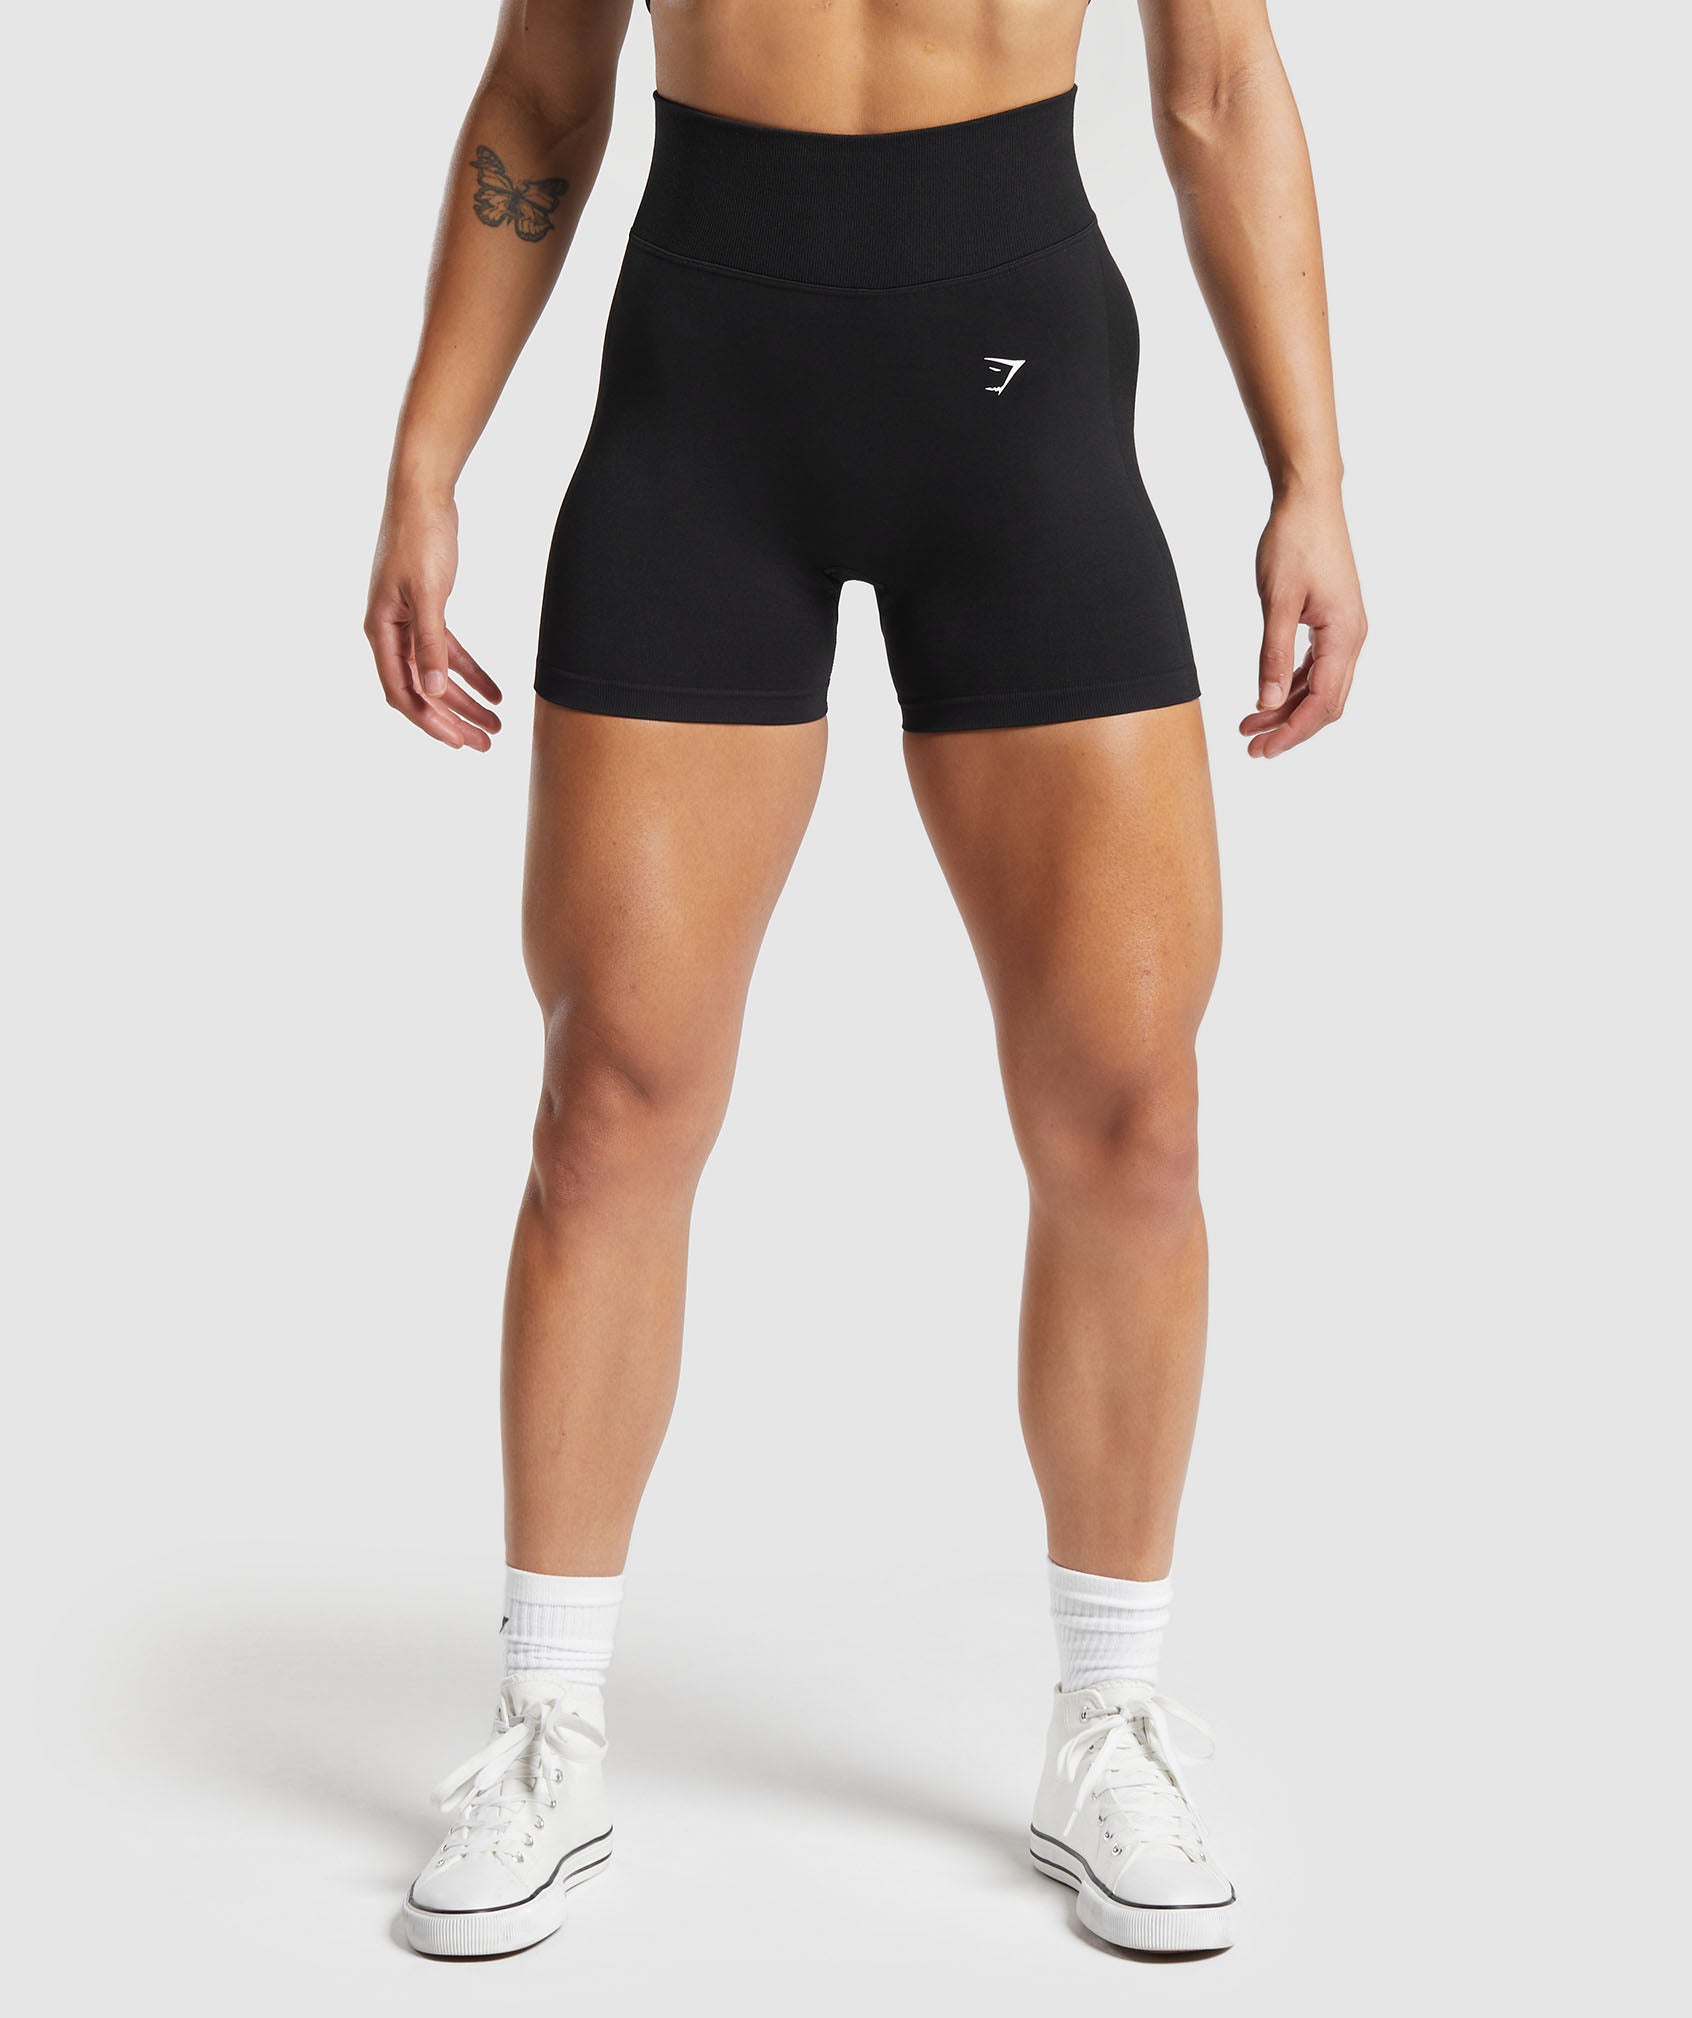 Lift Contour Seamless Shorts in Black/Black Marl - view 1